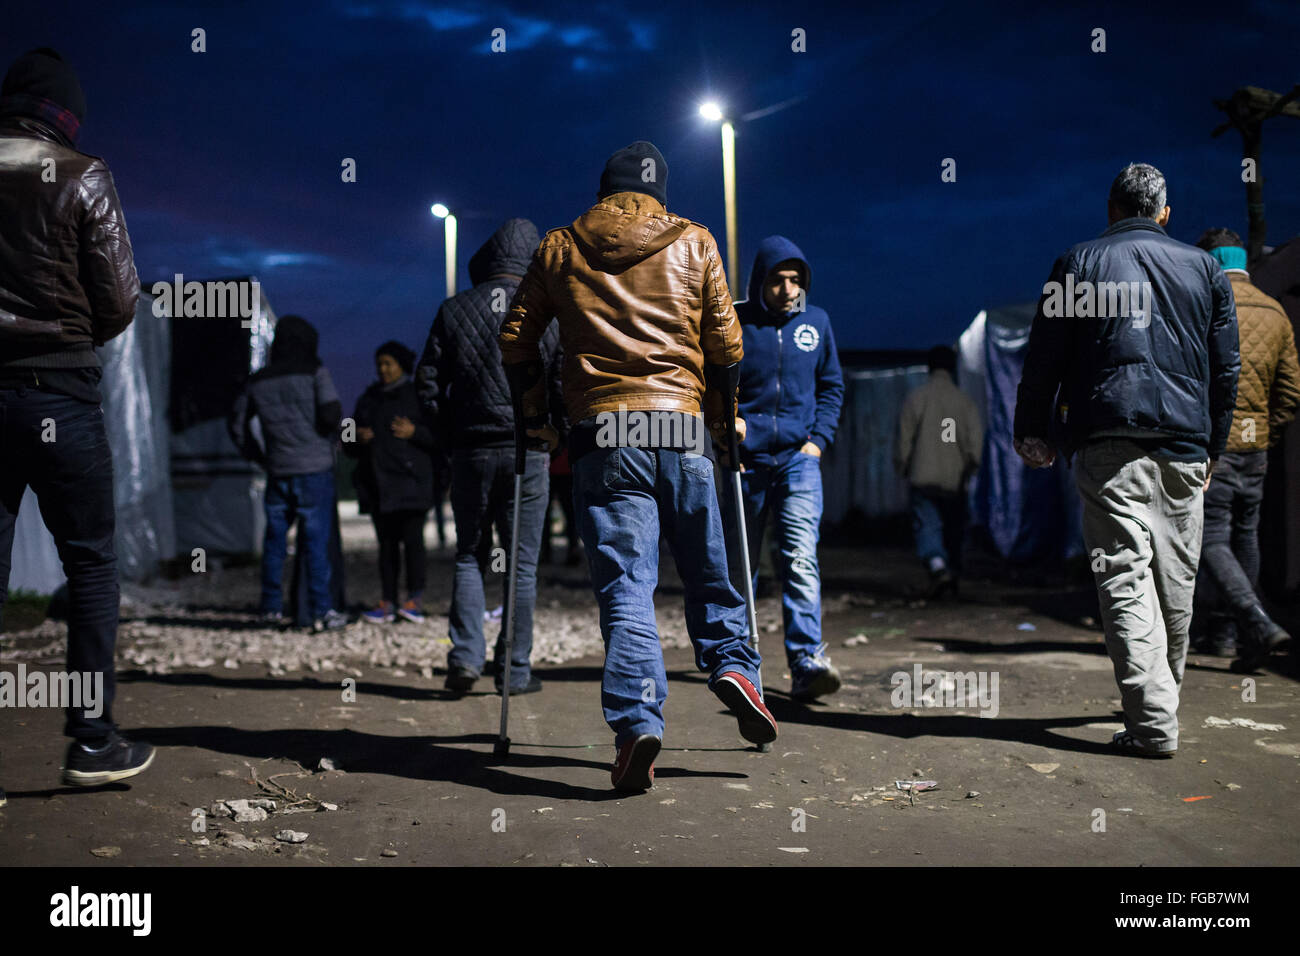 A refugee on crutches moves through the jungle refugee camp in Calais, France. The pathways are busier at night. Stock Photo